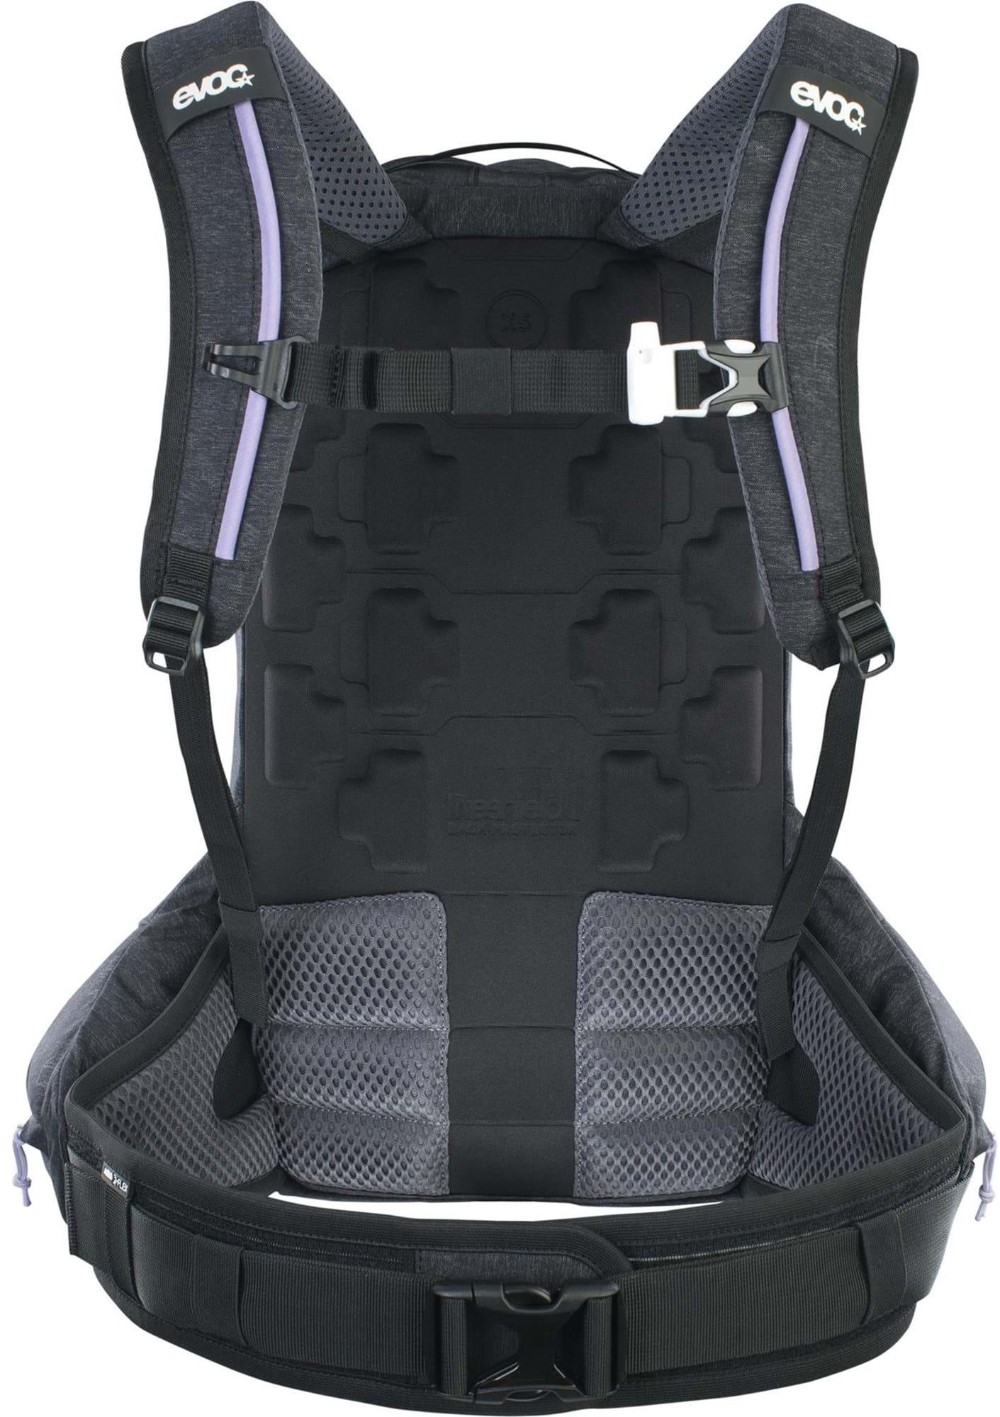 Trail Pro Protector Backpack SF 12L image 1